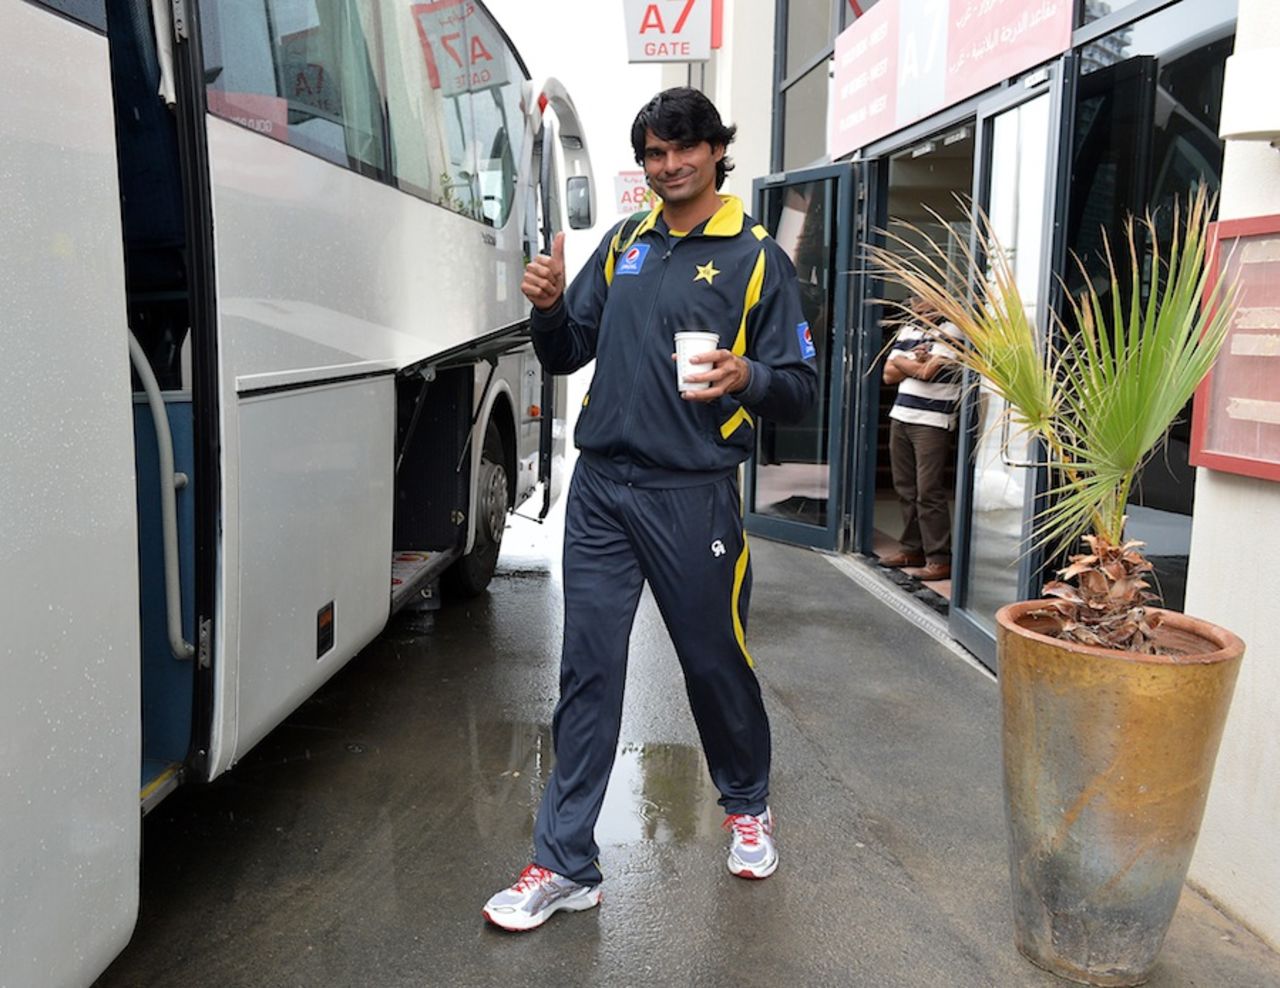 Mohammad Irfan is all smiles before boarding the bus, Dubai, January 7, 2014